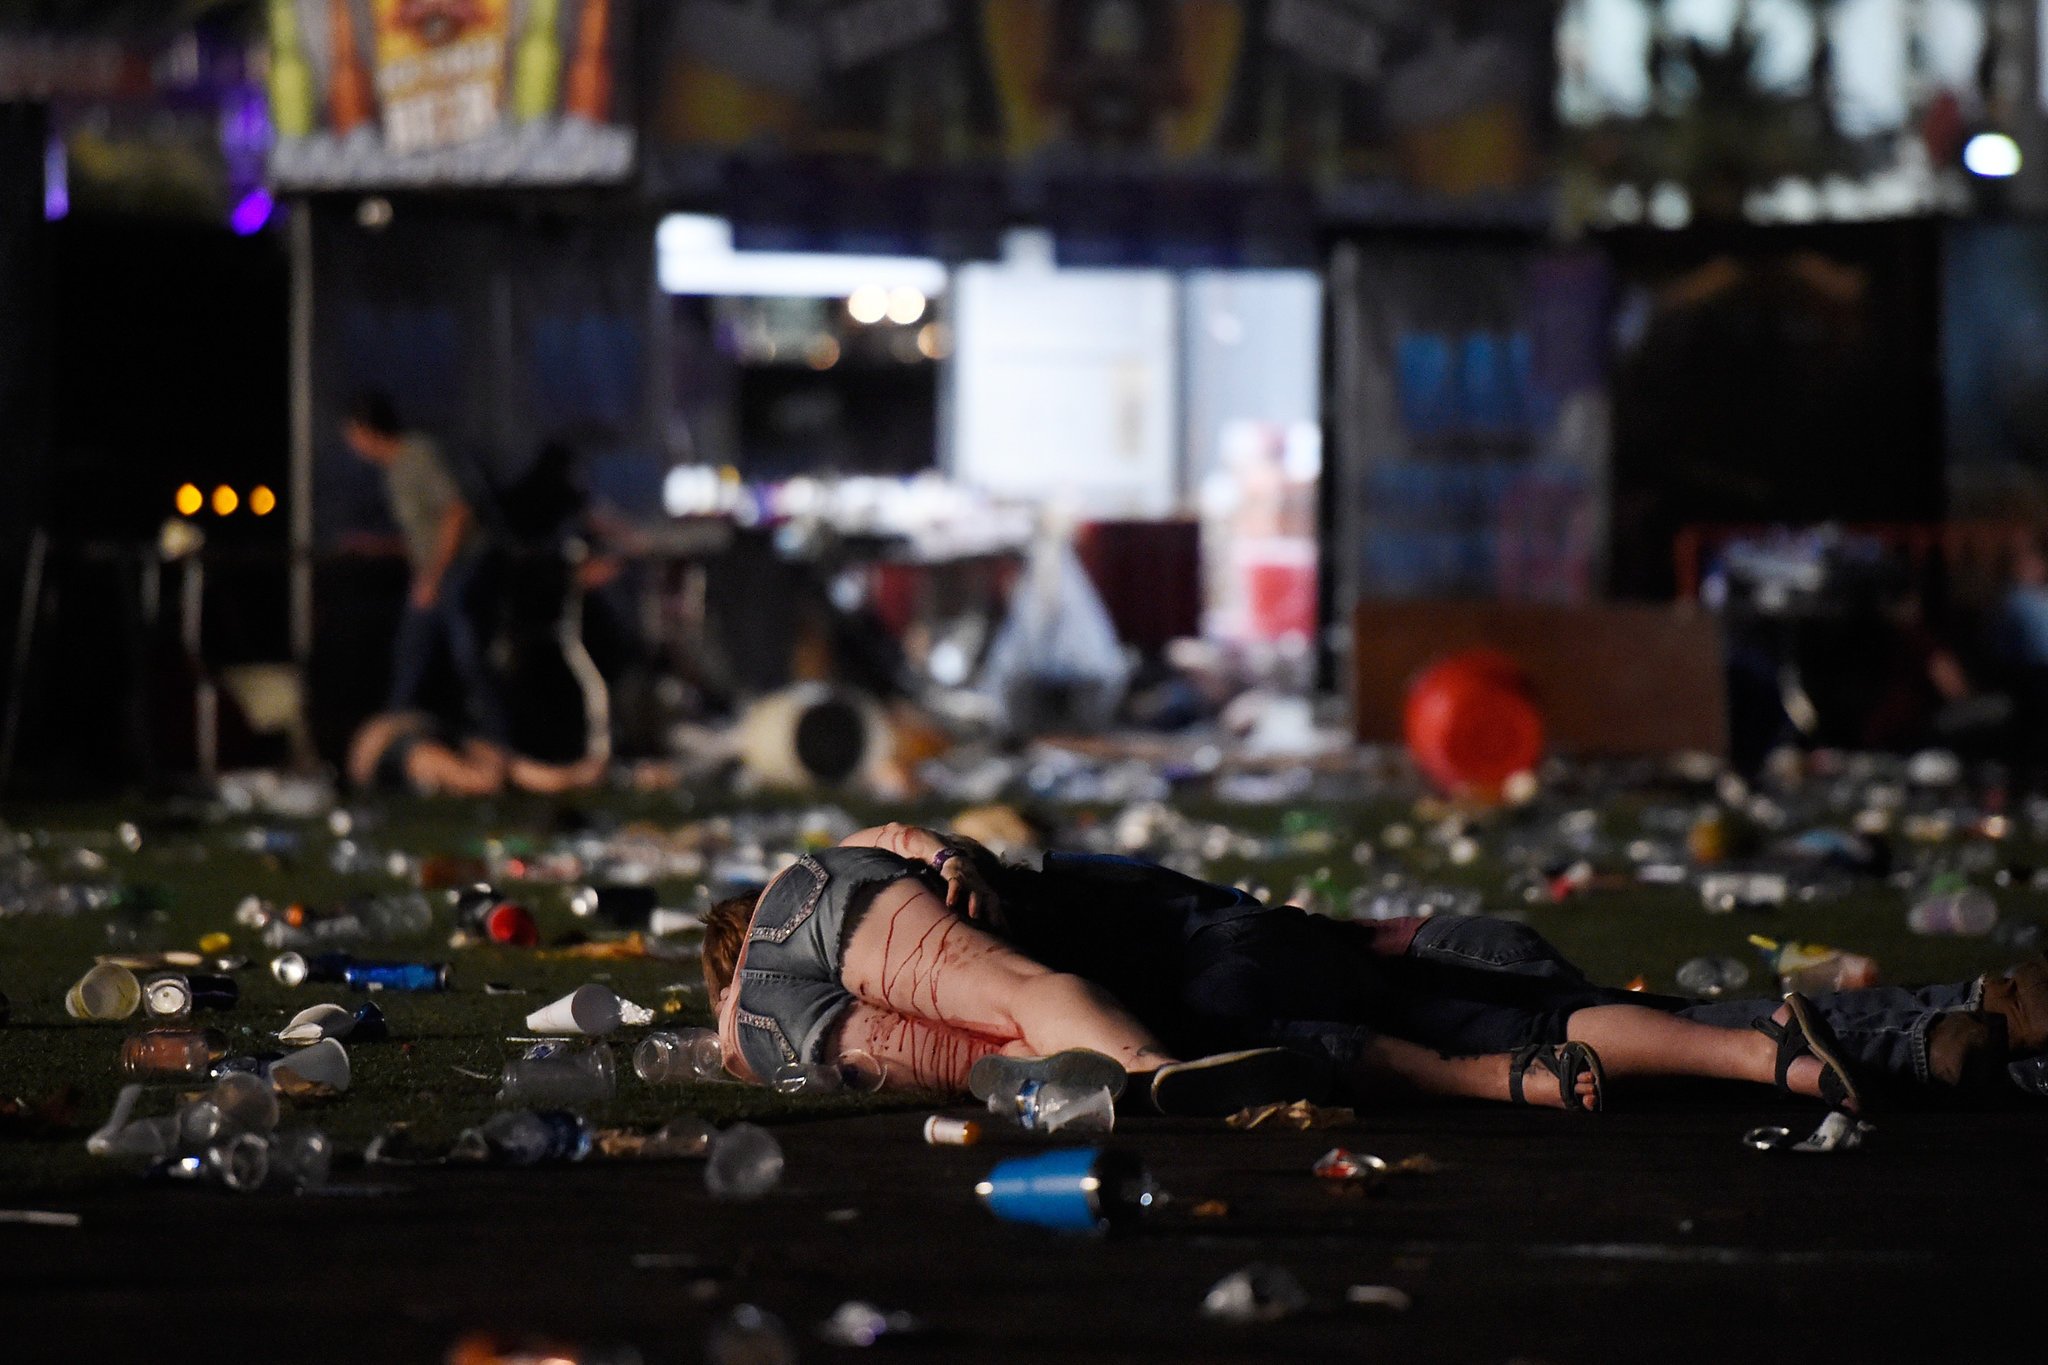 Photo: David Becker/Getty. A person lies on the ground covered with blood at the Route 91 Harvest country music festival after apparent gun fire was heard on October 1, 2017 in Las Vegas, Nevada. There are reports of an active shooter around the Mandalay Bay Resort and Casino